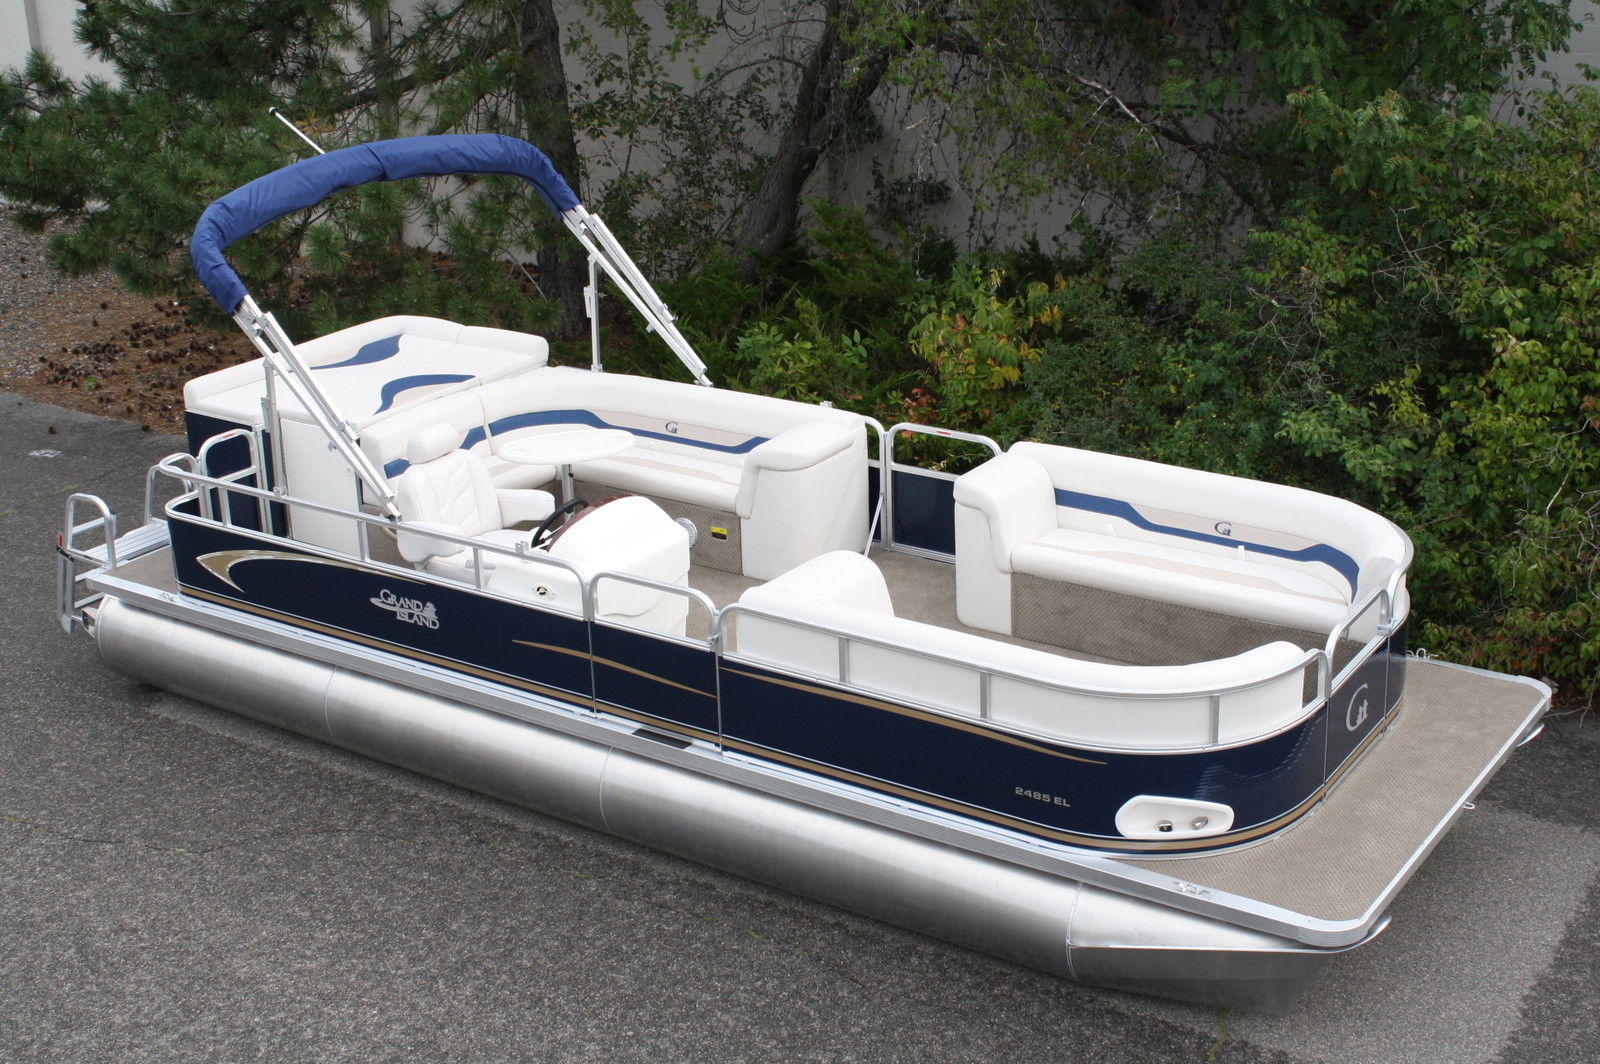 say Tahoe on the side and some say Grand Island.This is a new 2014 8.5 ft w...